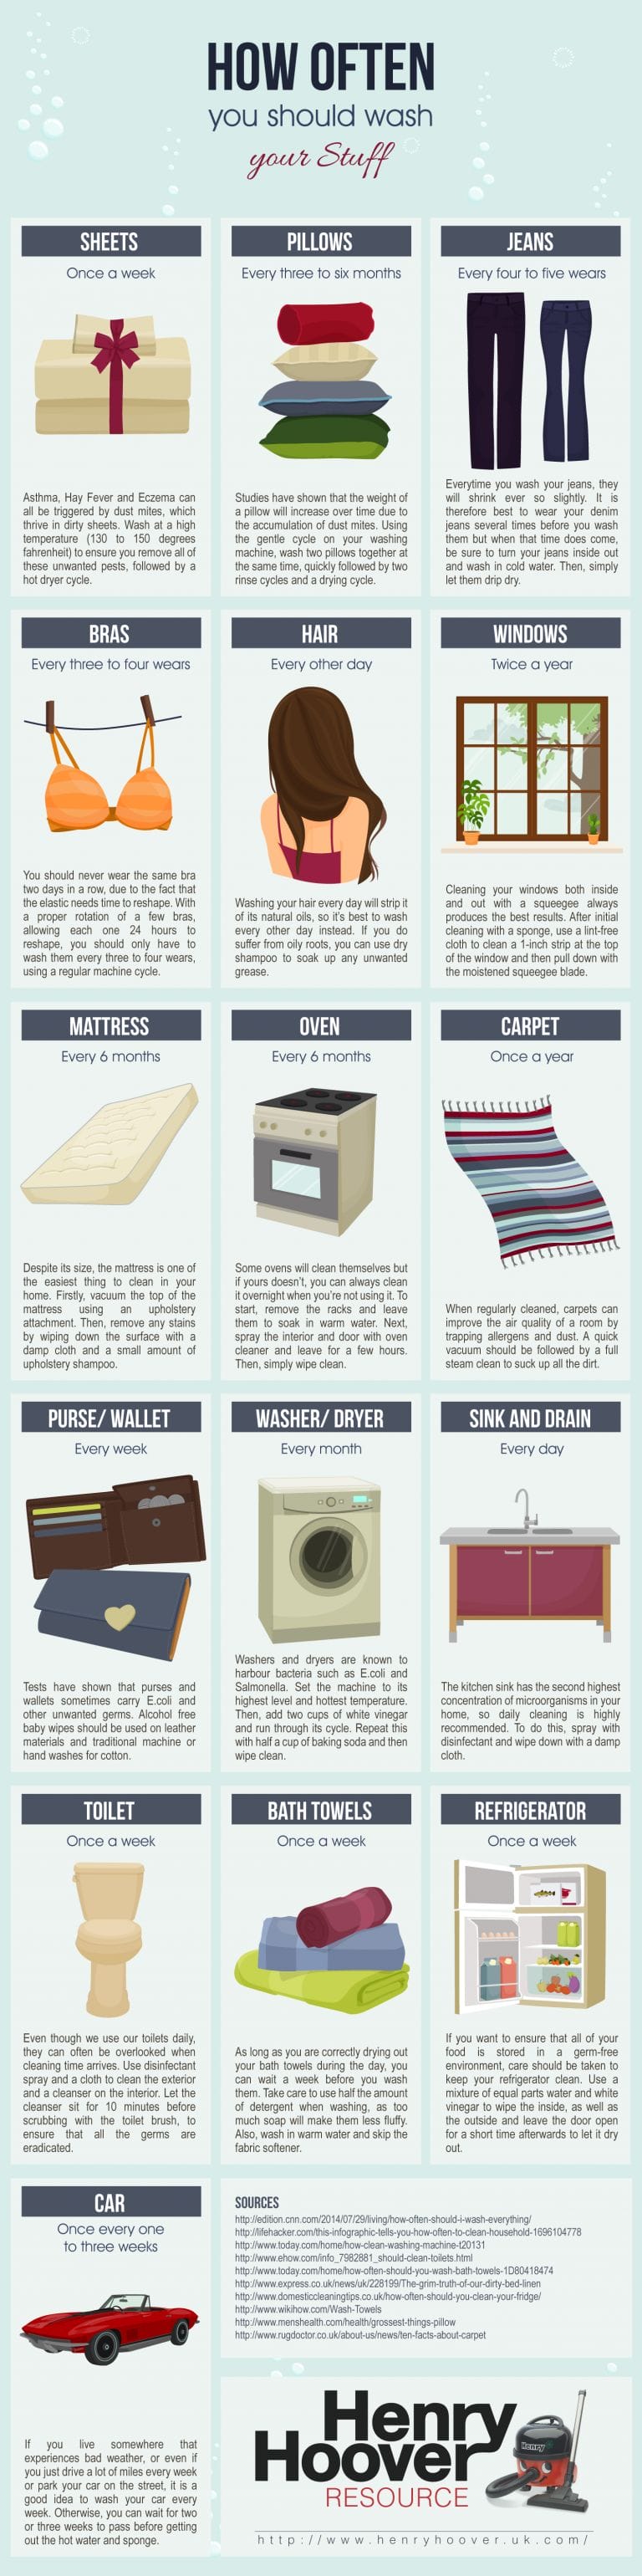 How Often Should You Wash Bedding Before Use?